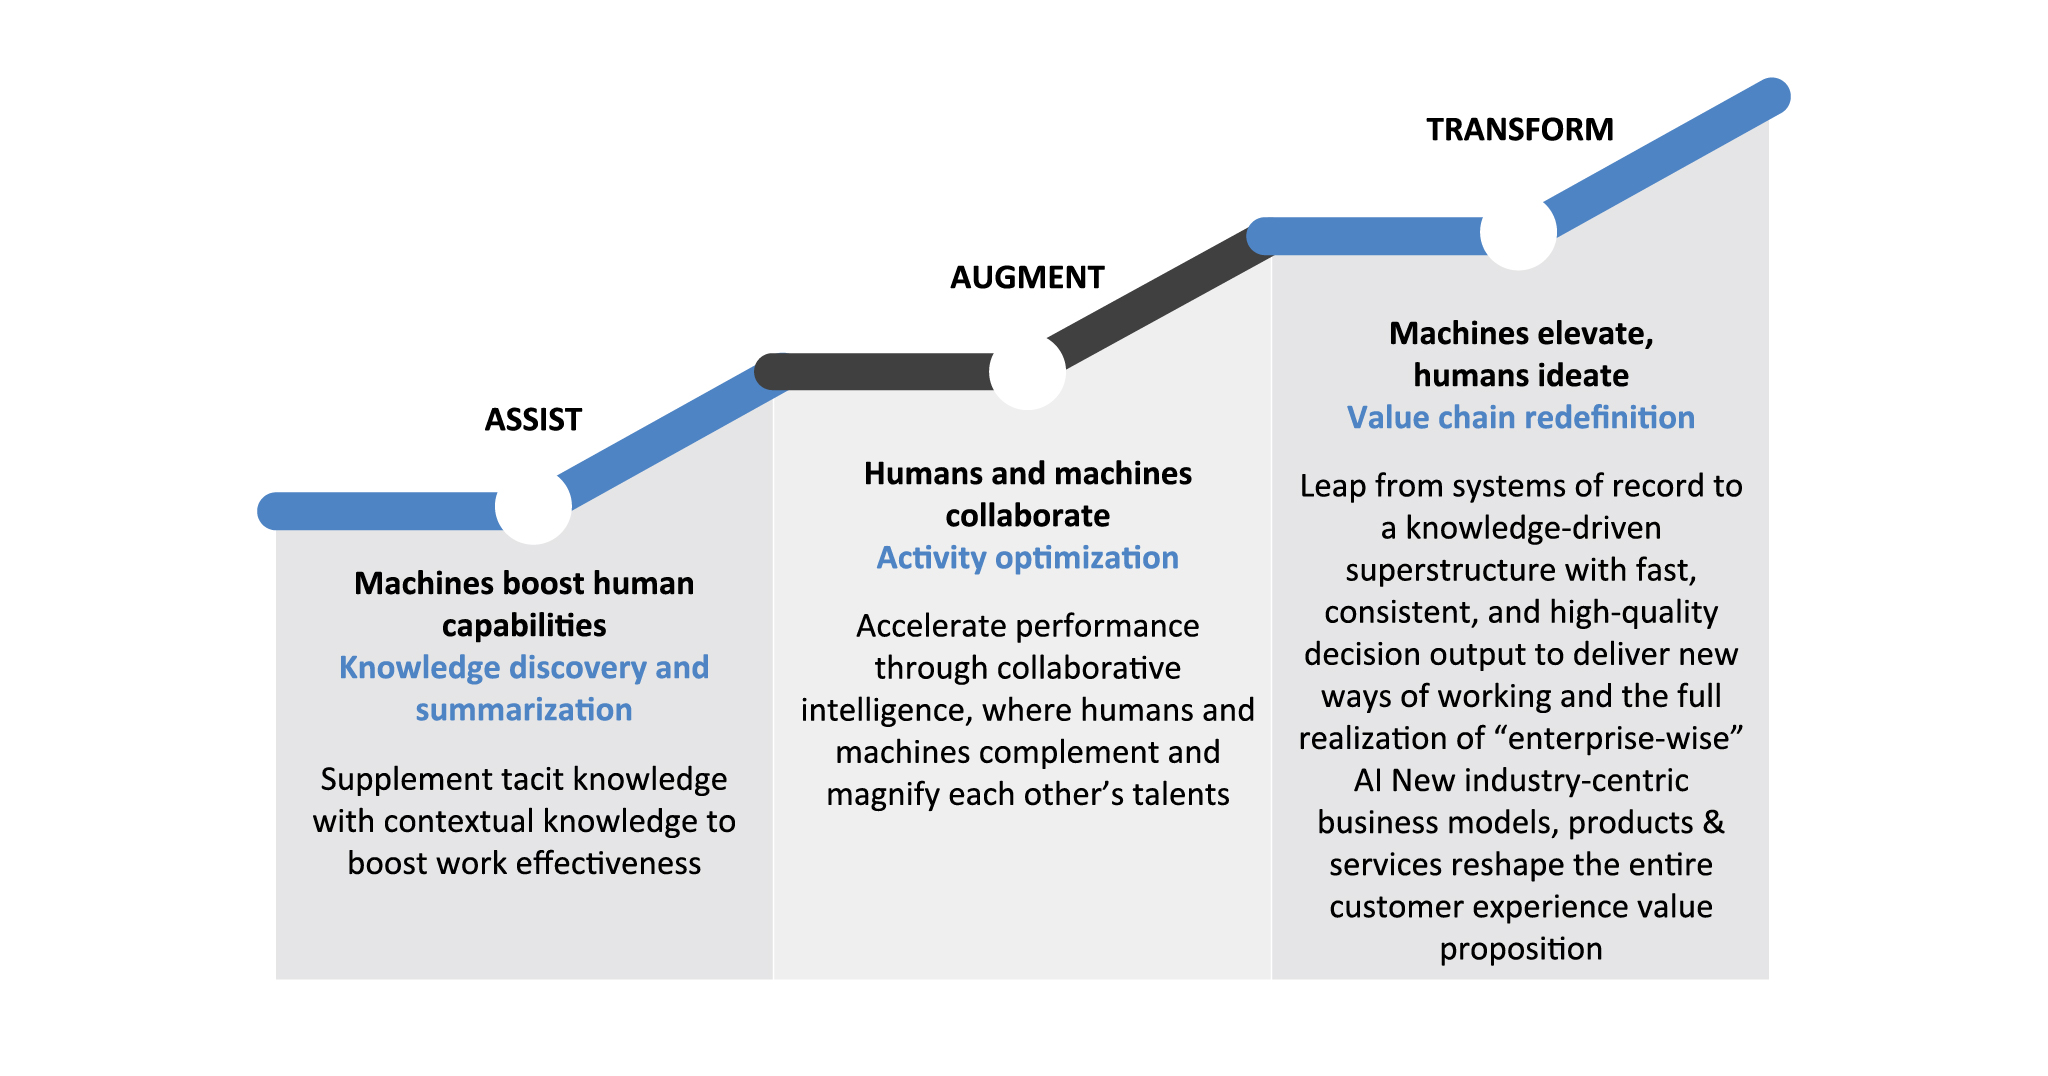 This image shows the TCS path of AI potential to performance, a continuum that builds upon and reinforces each stage, which includes the assist, augment, and transform stages.